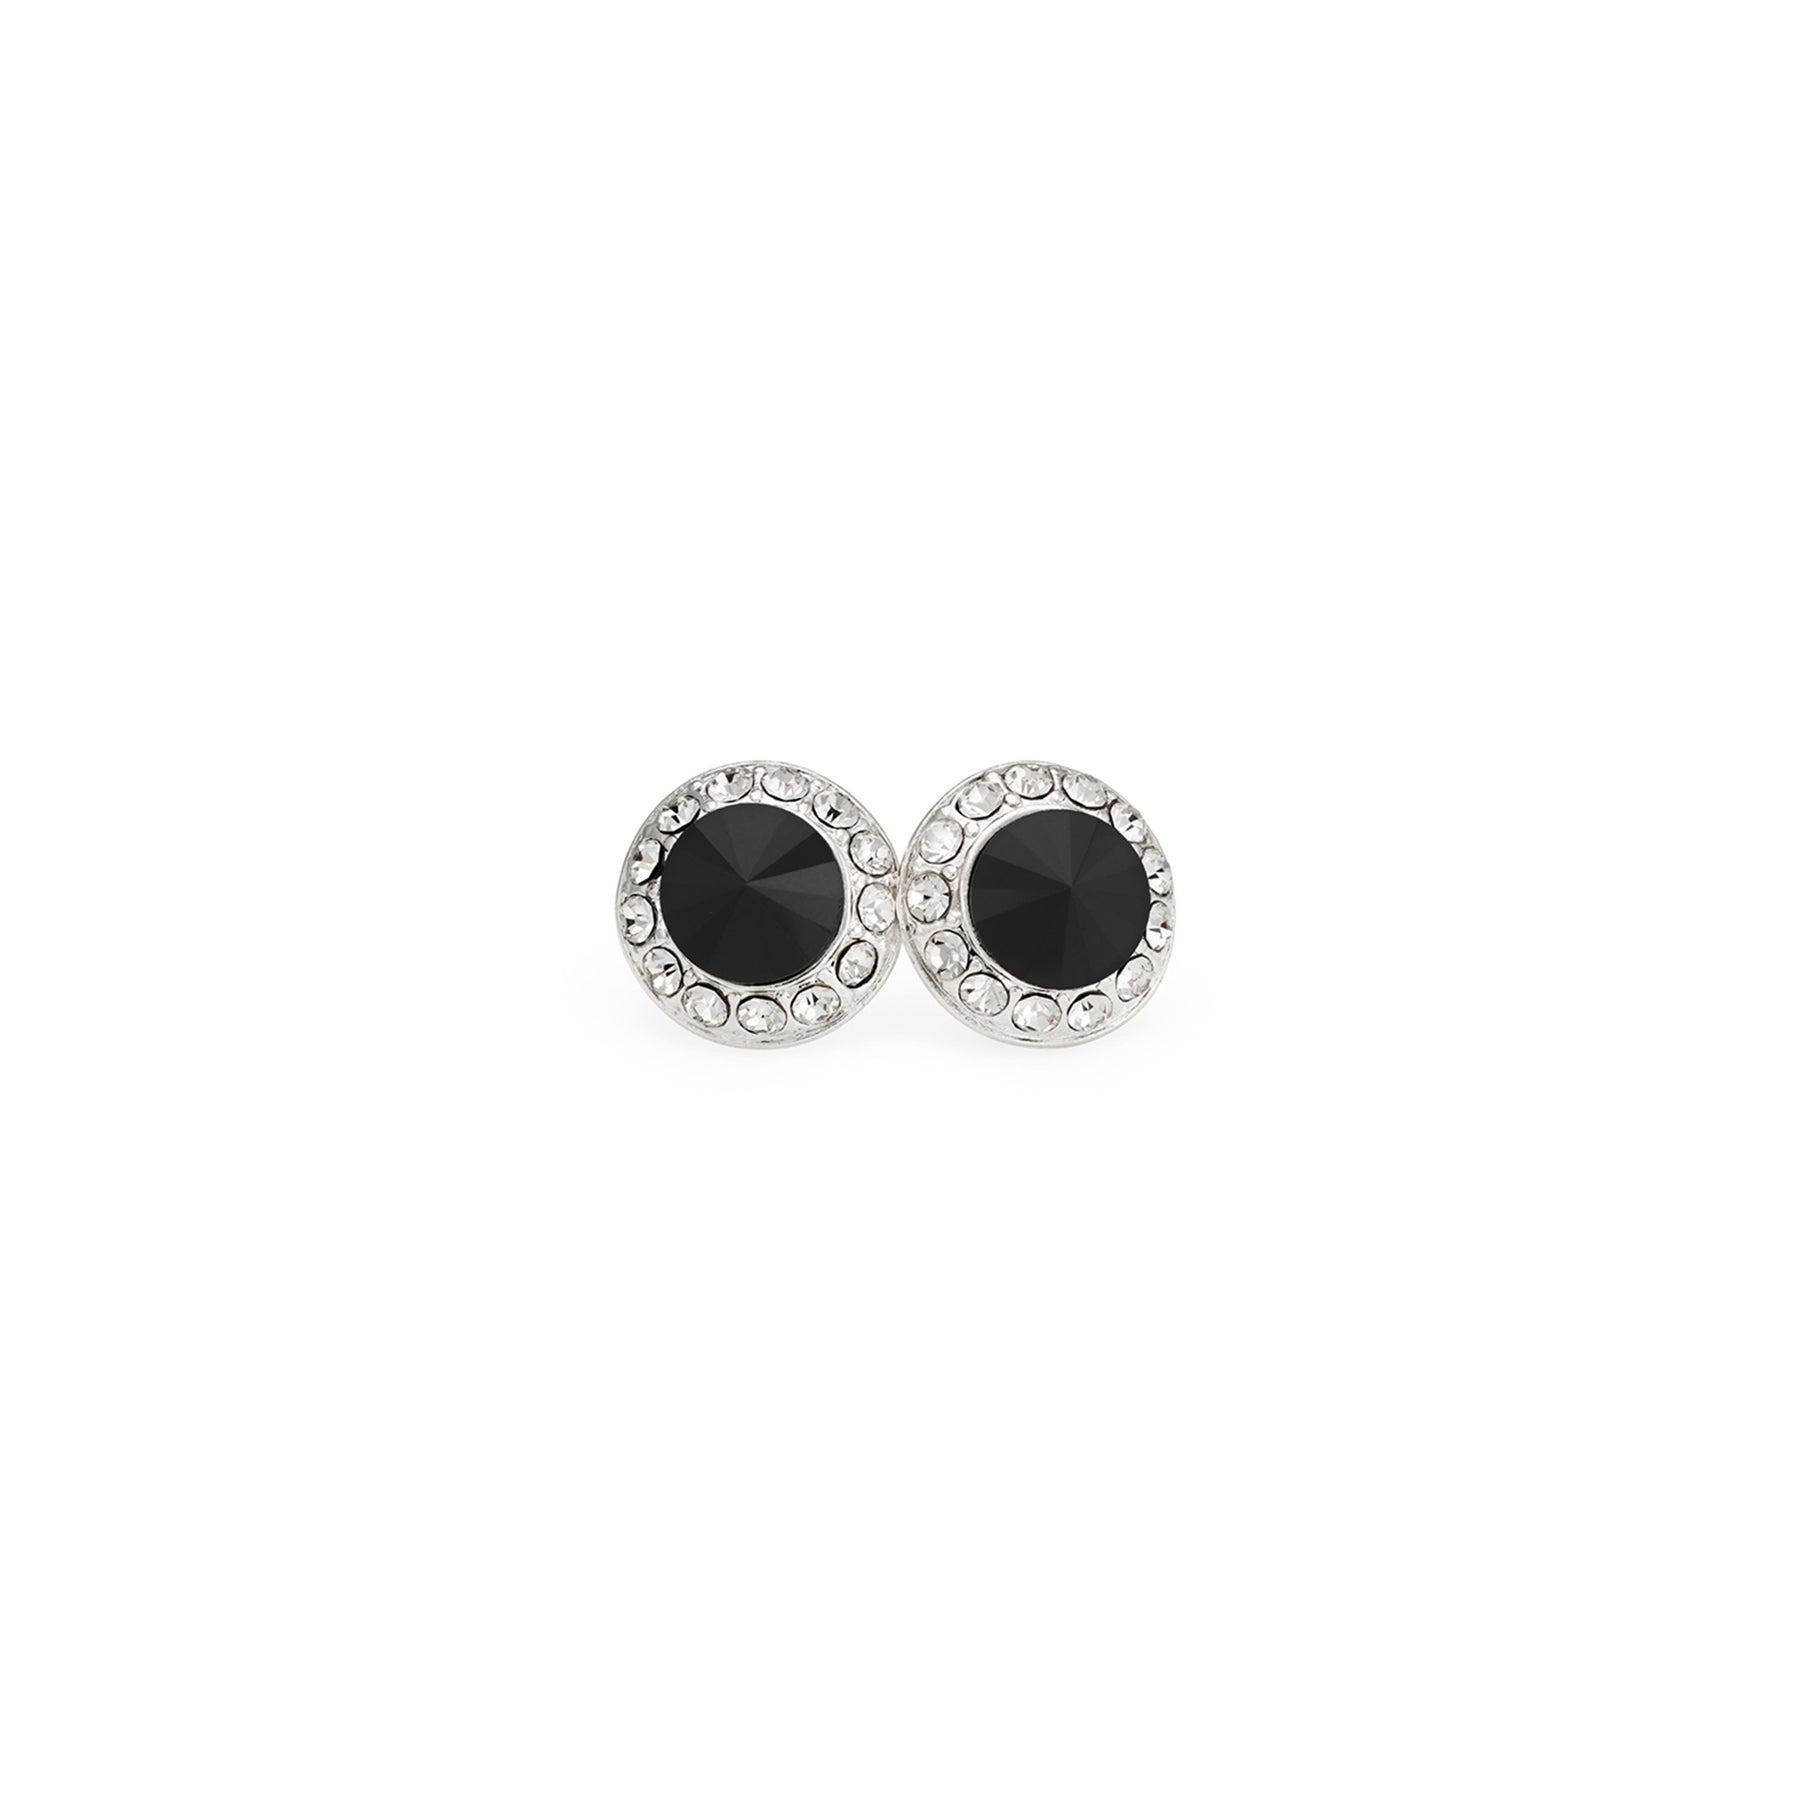 18mm Celestial Button Color Earrings - Silver Plate